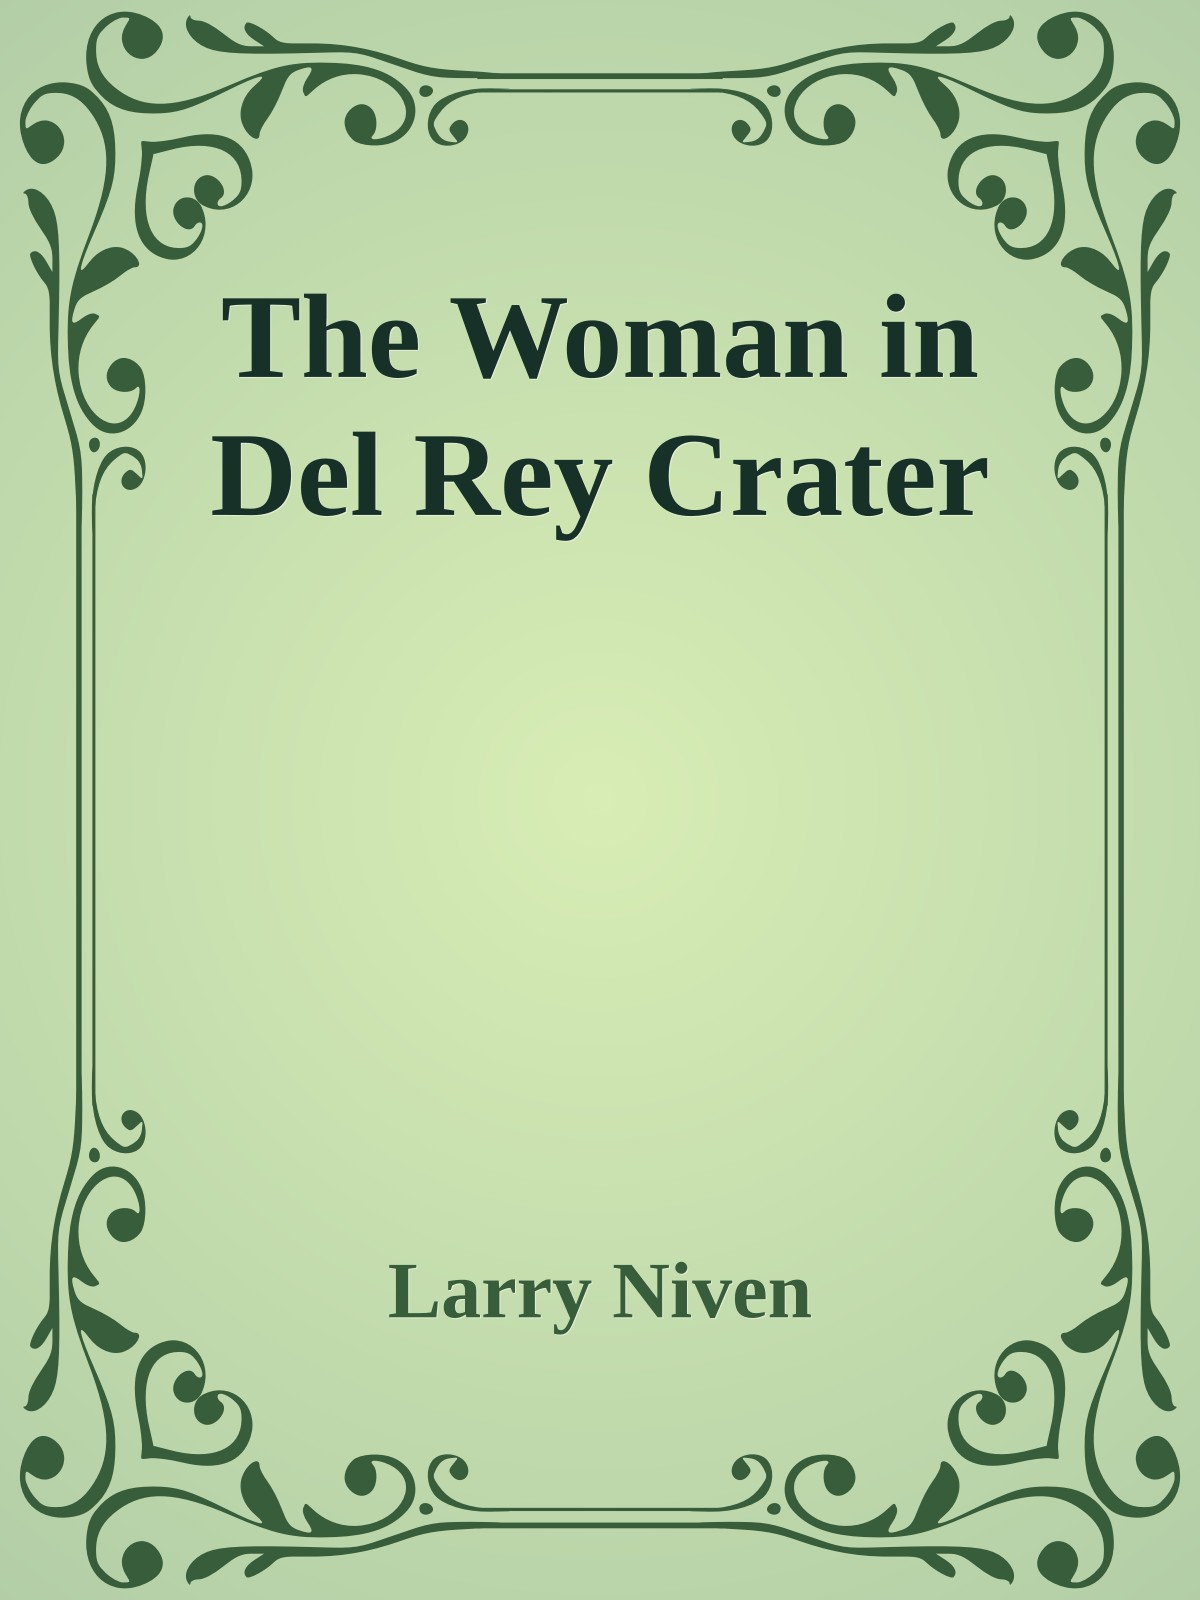 The Woman in Del Rey Crater